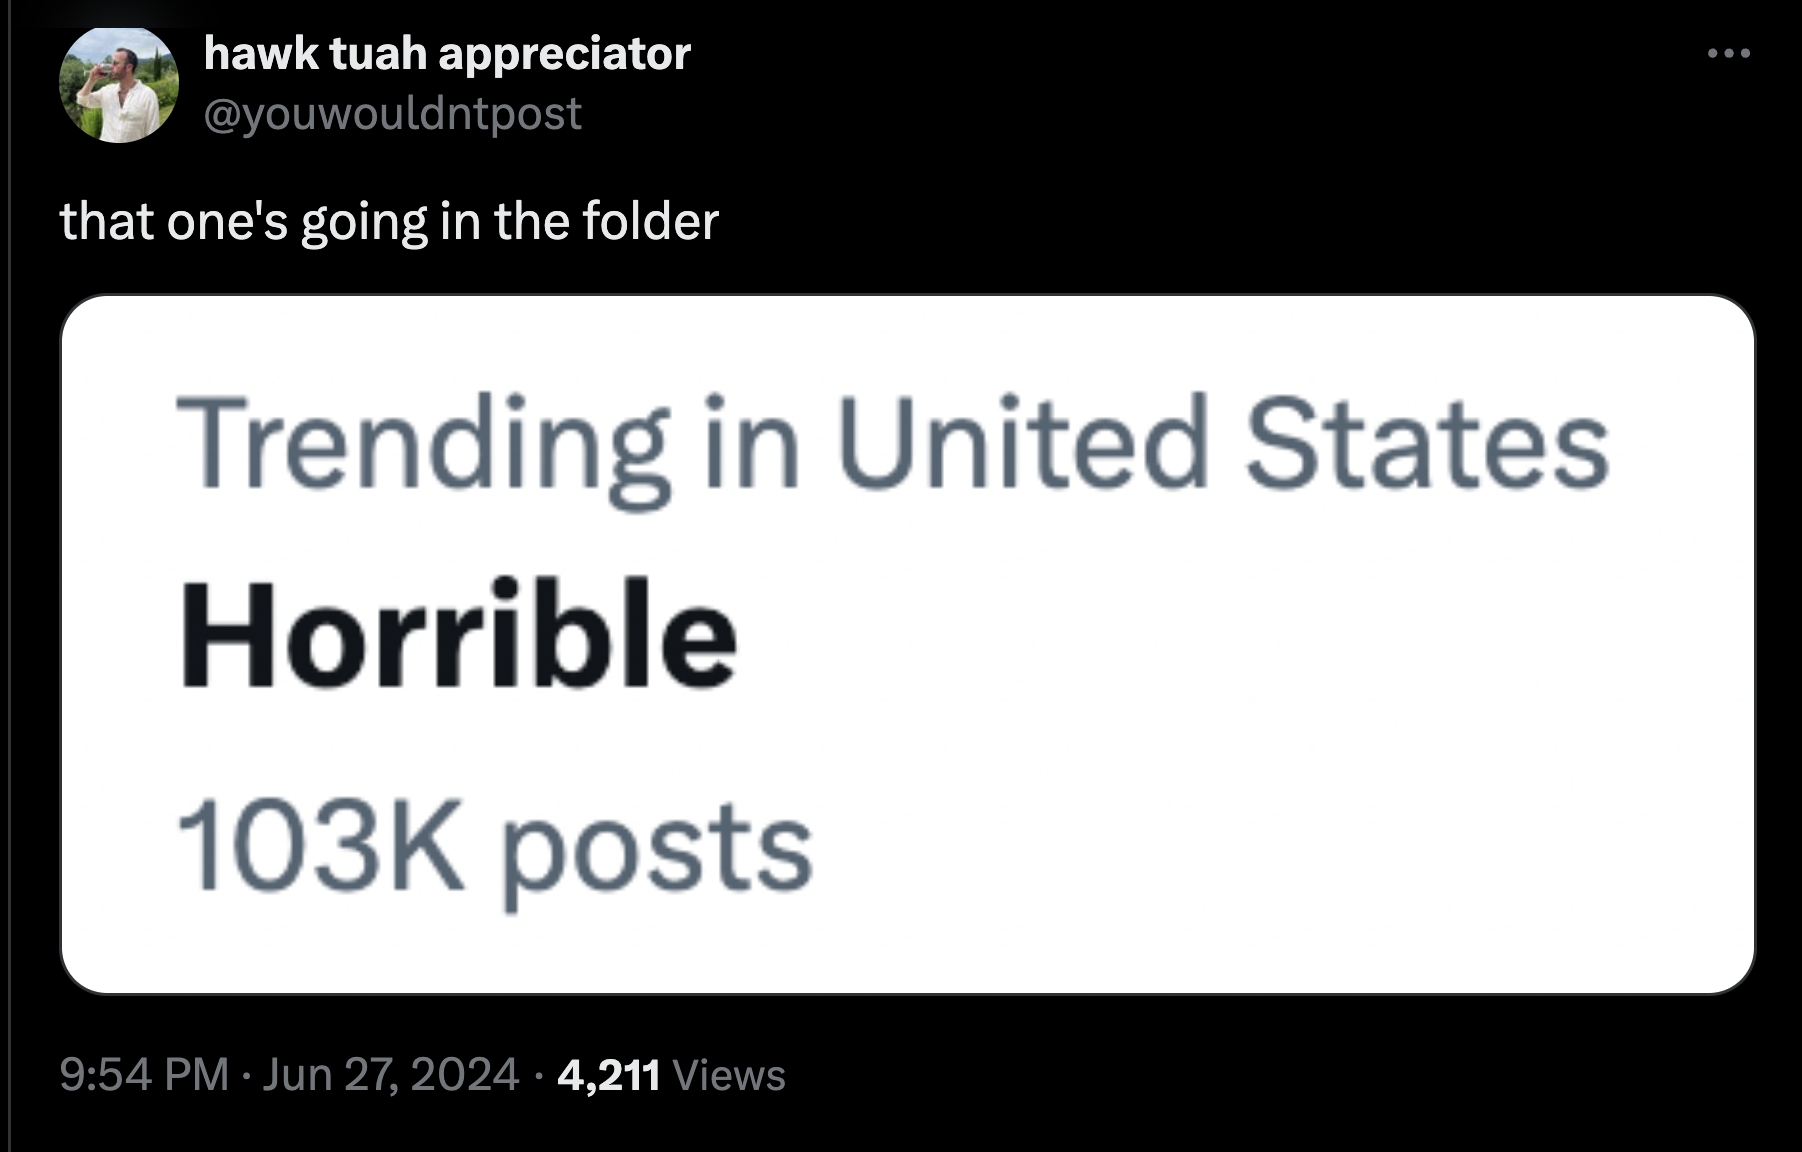 screenshot - hawk tuah appreciator that one's going in the folder Trending in United States Horrible posts 4,211 Views